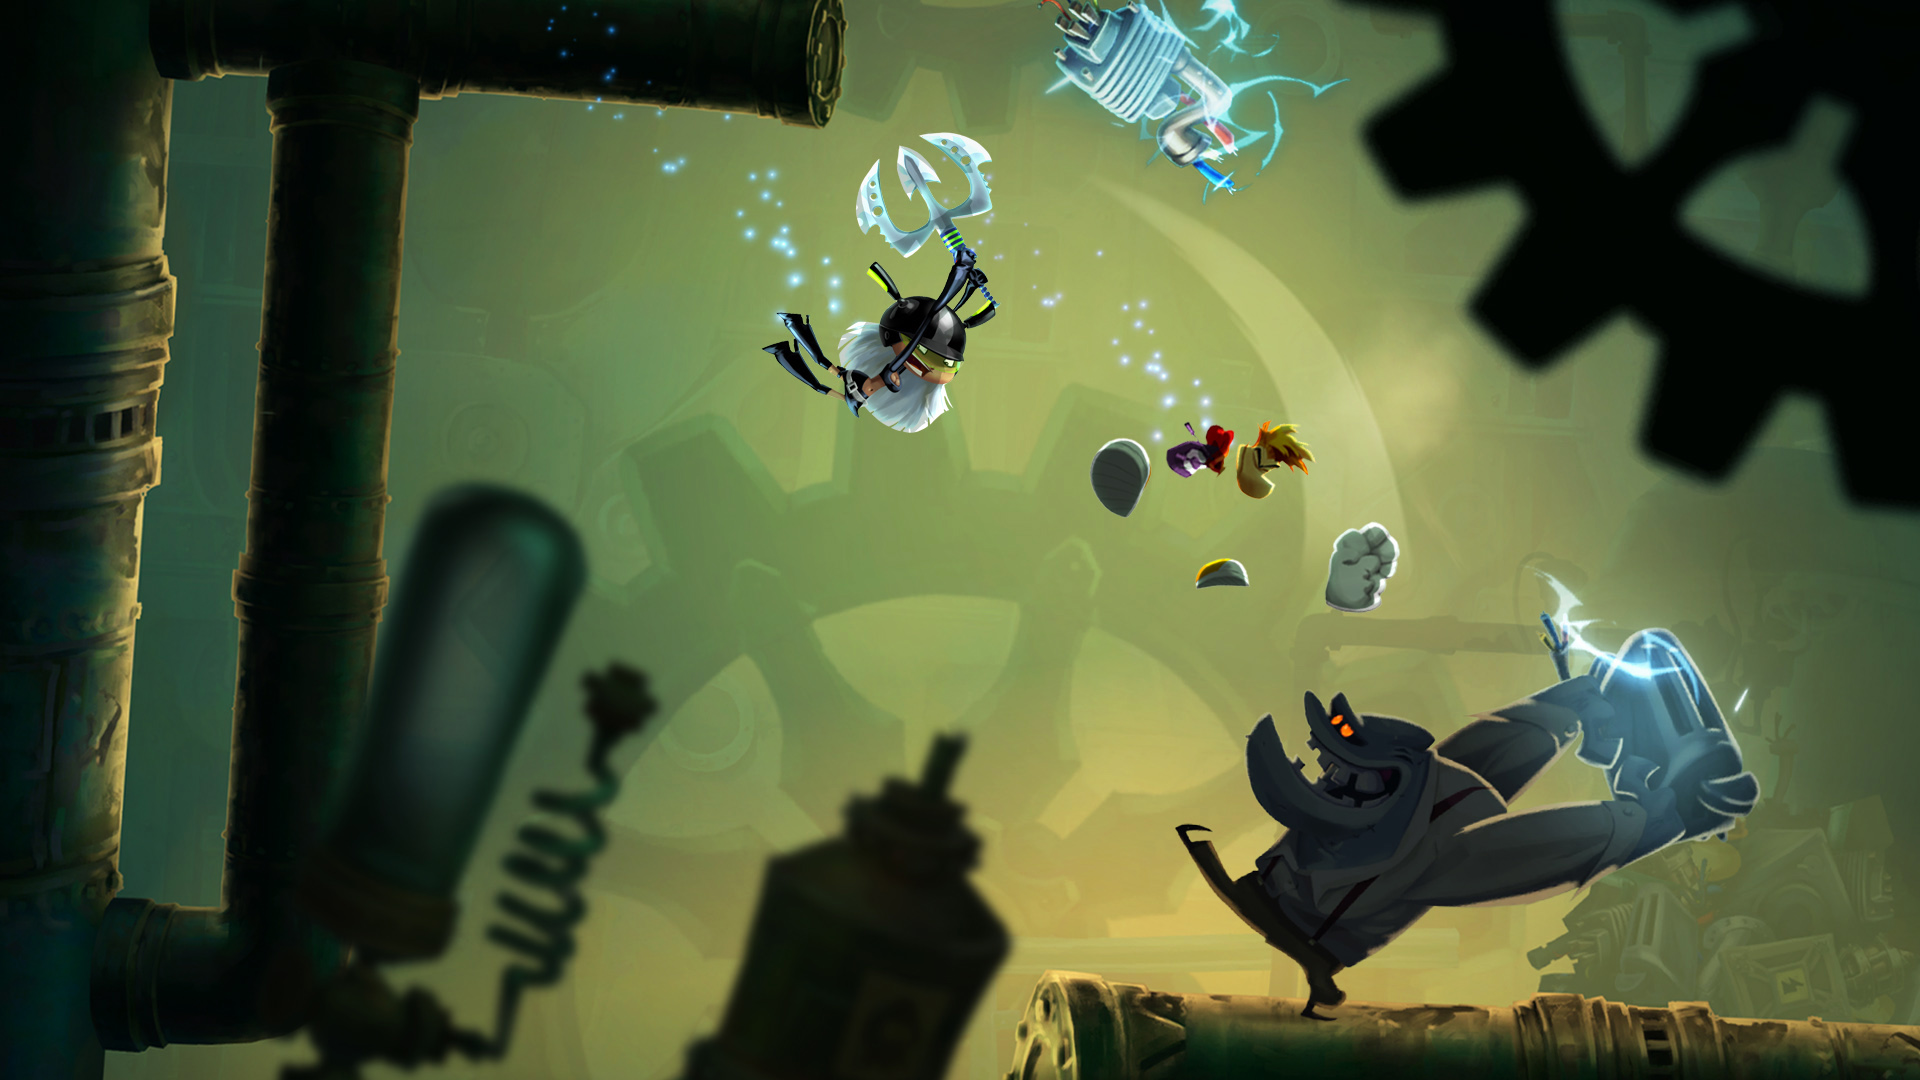 Feast your eyes on new Rayman Legends video! — GAMINGTREND